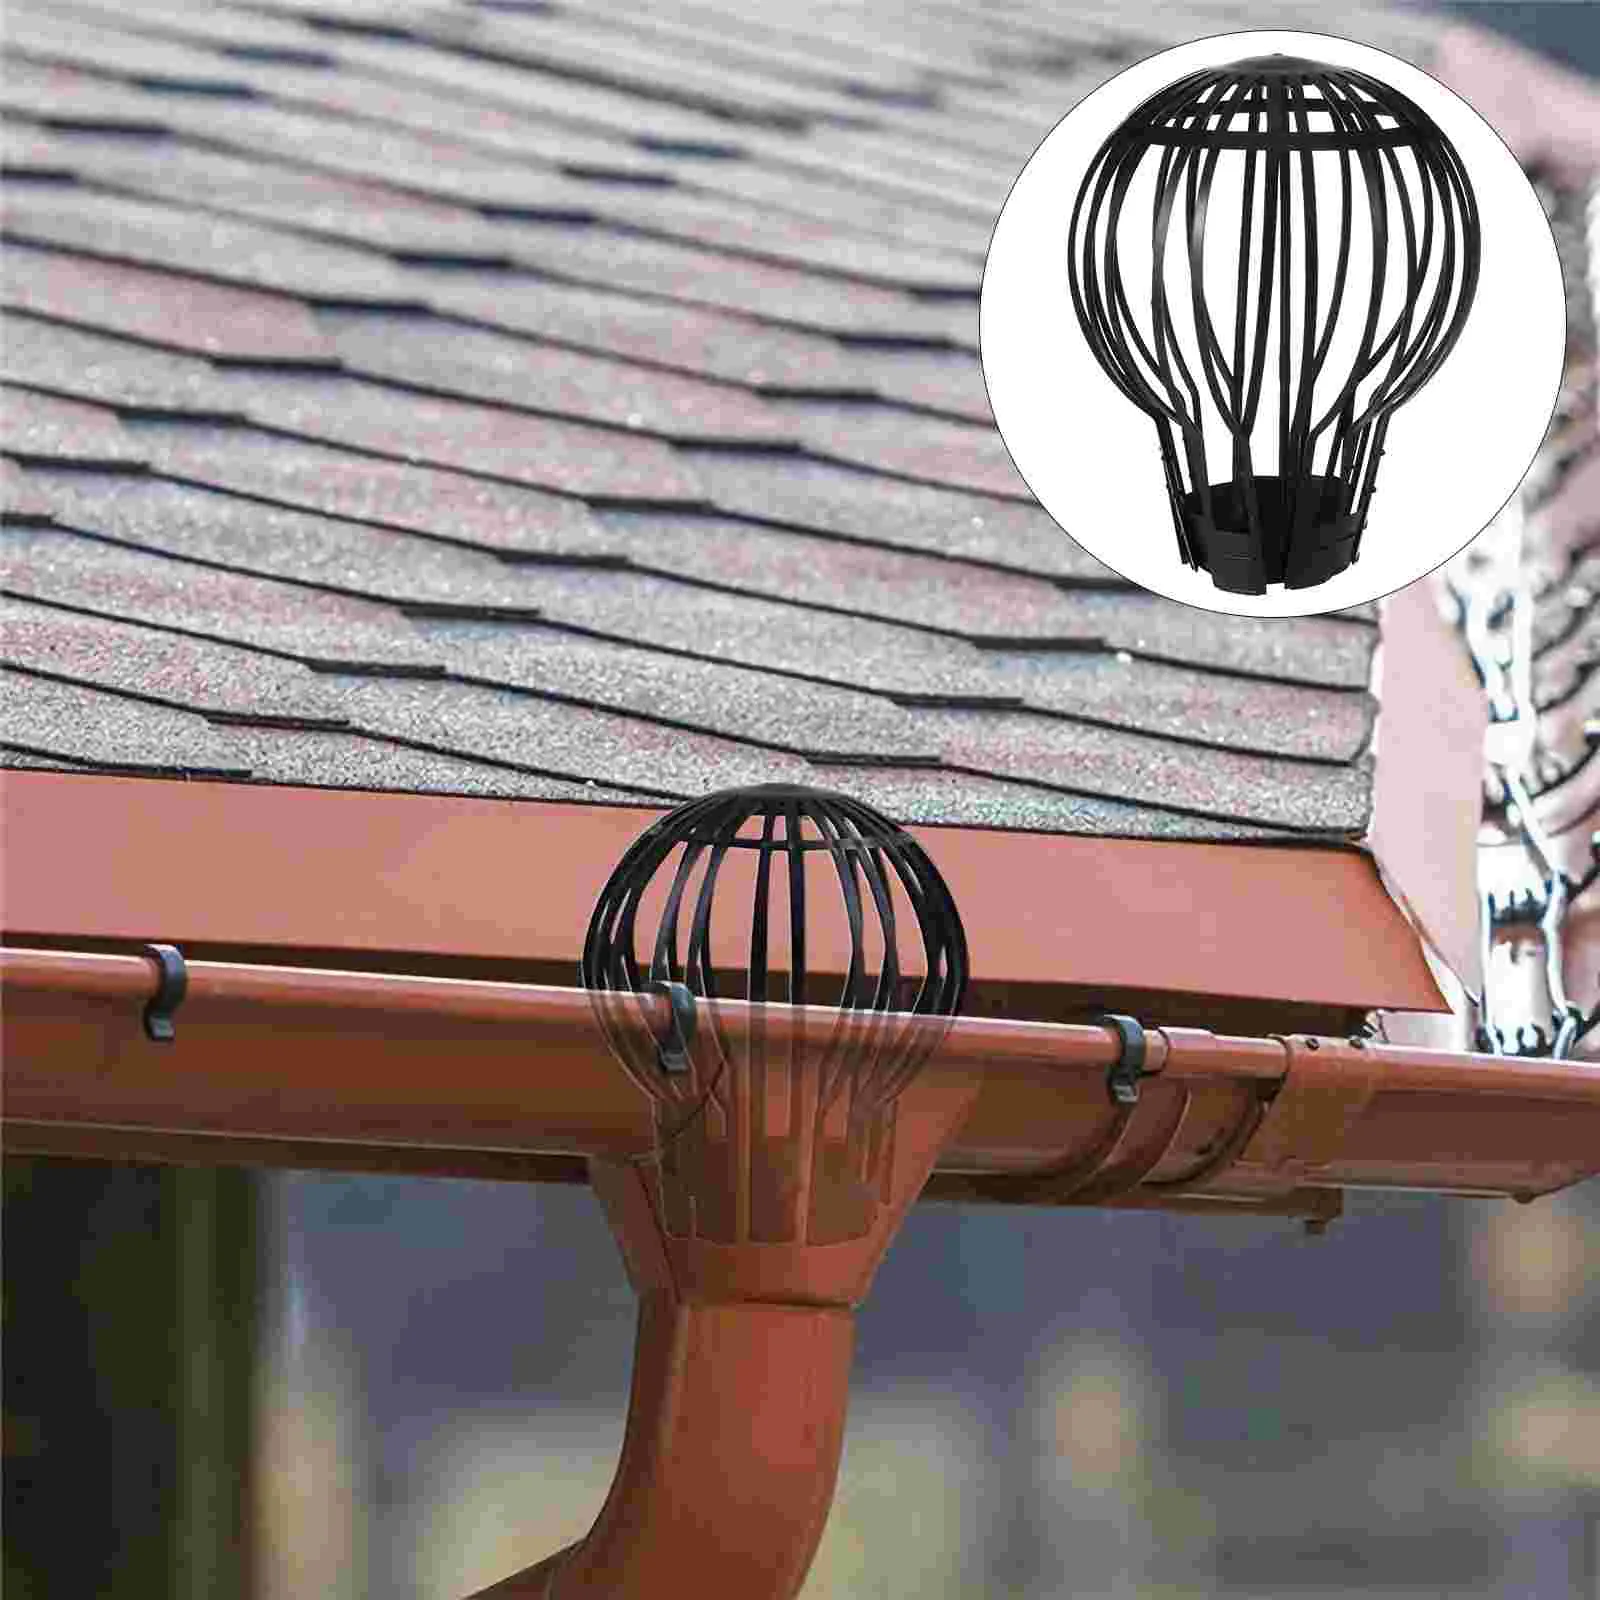 

4pcs Rooftop Drain Sink Draining Mesh Cover Anti-blocking Cover Leaf Filter